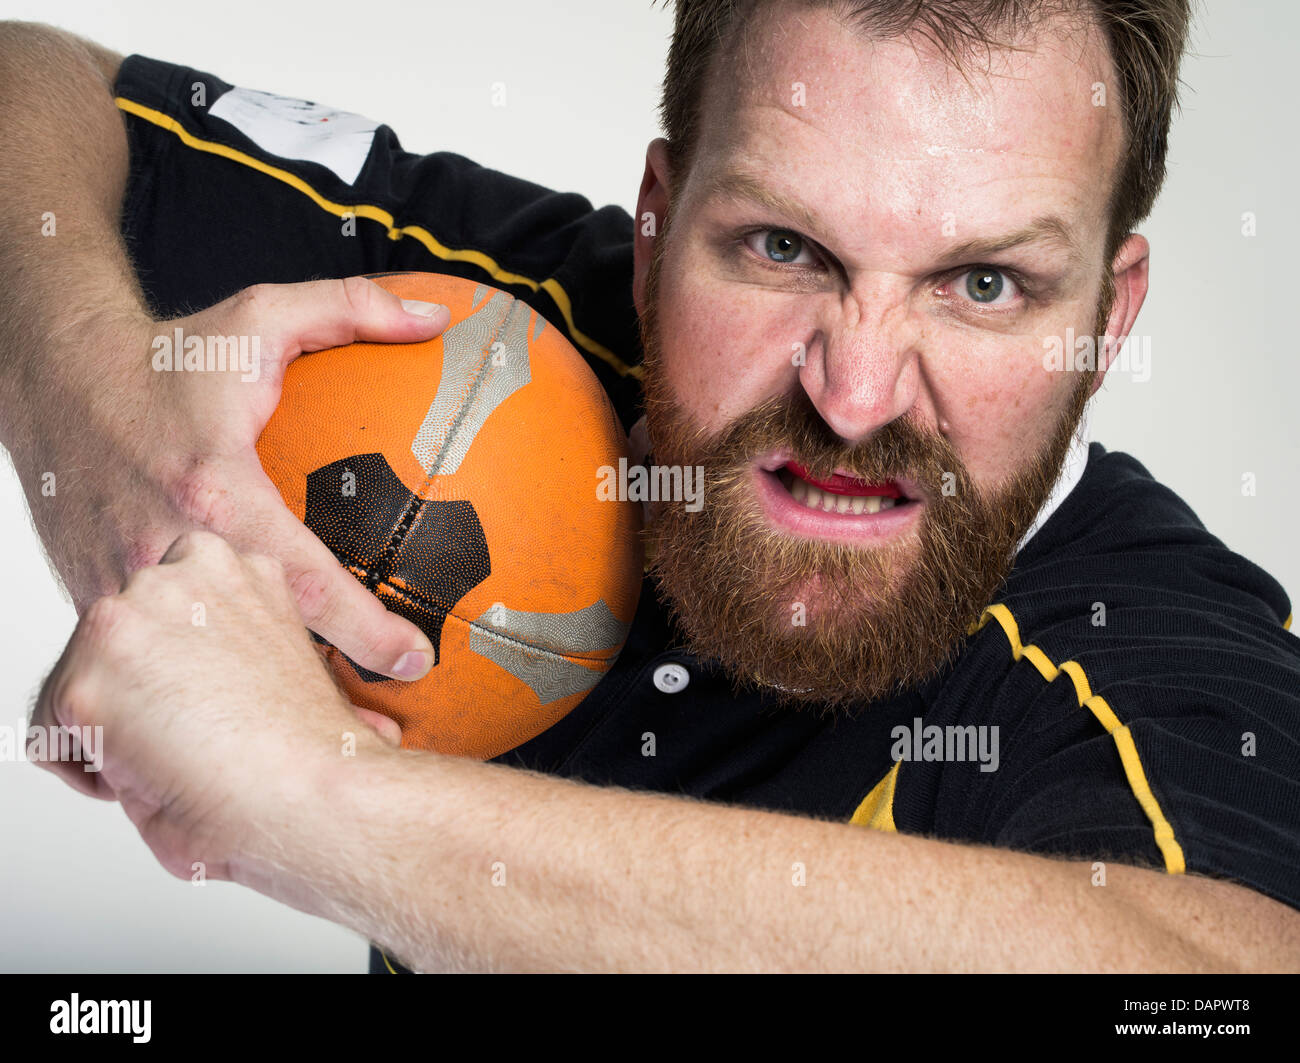 Rugby player with ball Banque D'Images